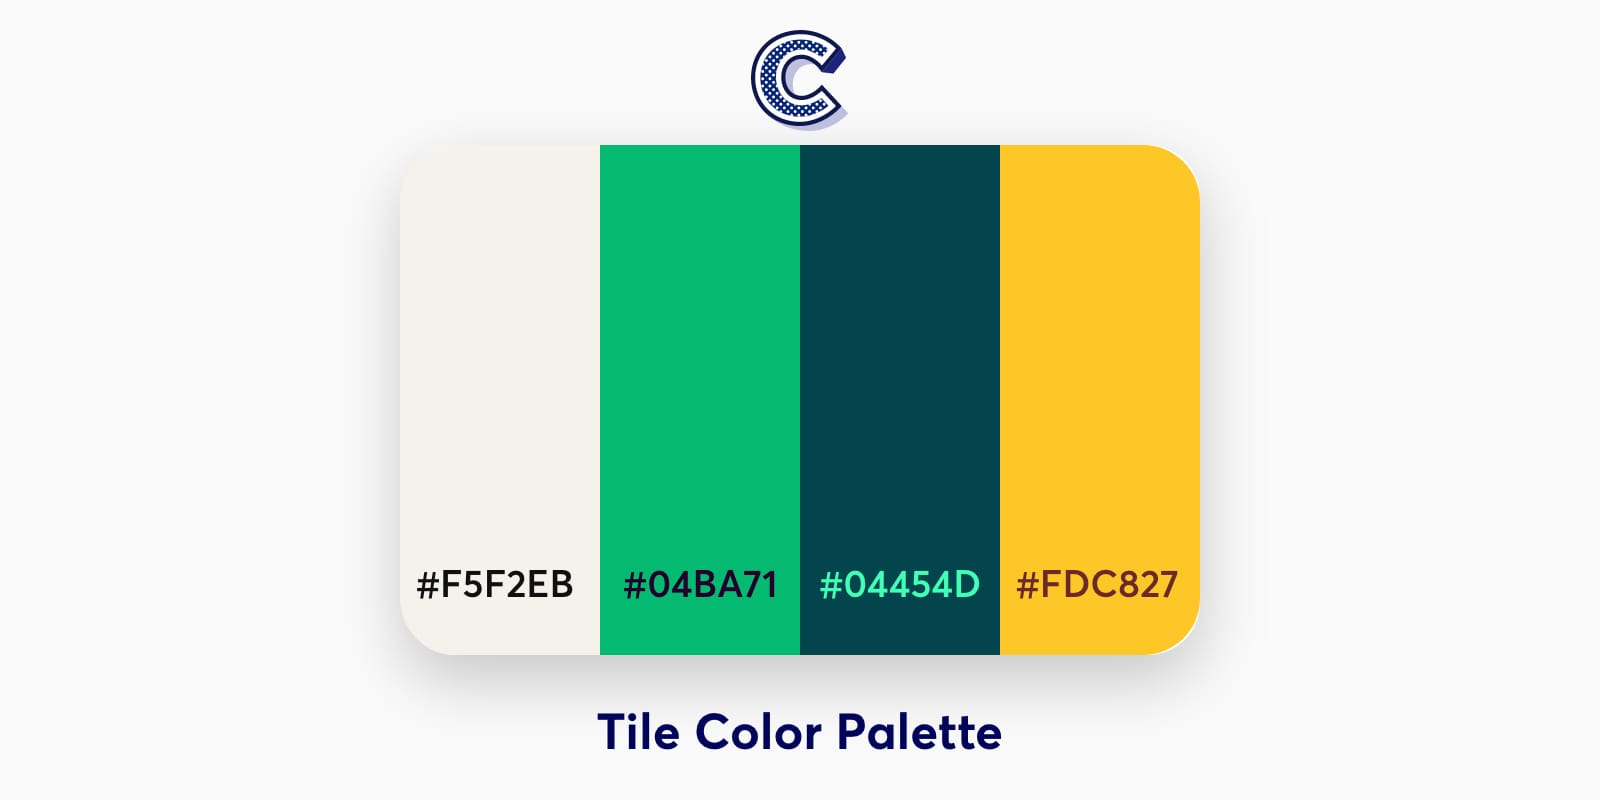 the featured image of tile color palette